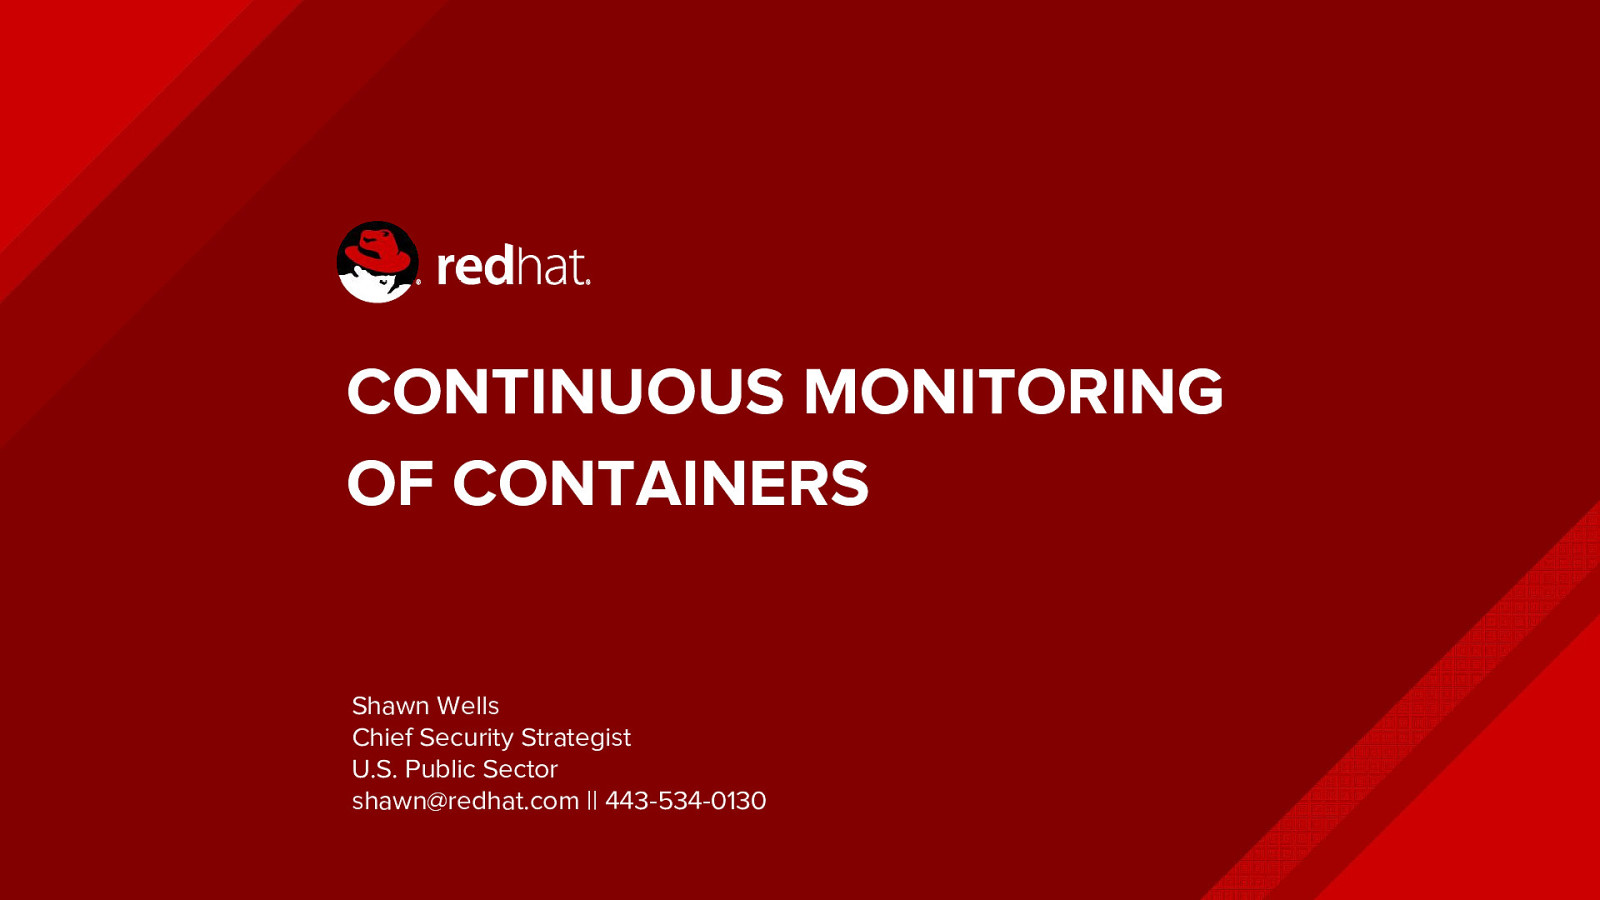 IRS Mini Summit on Continuous Monitoring of Containers